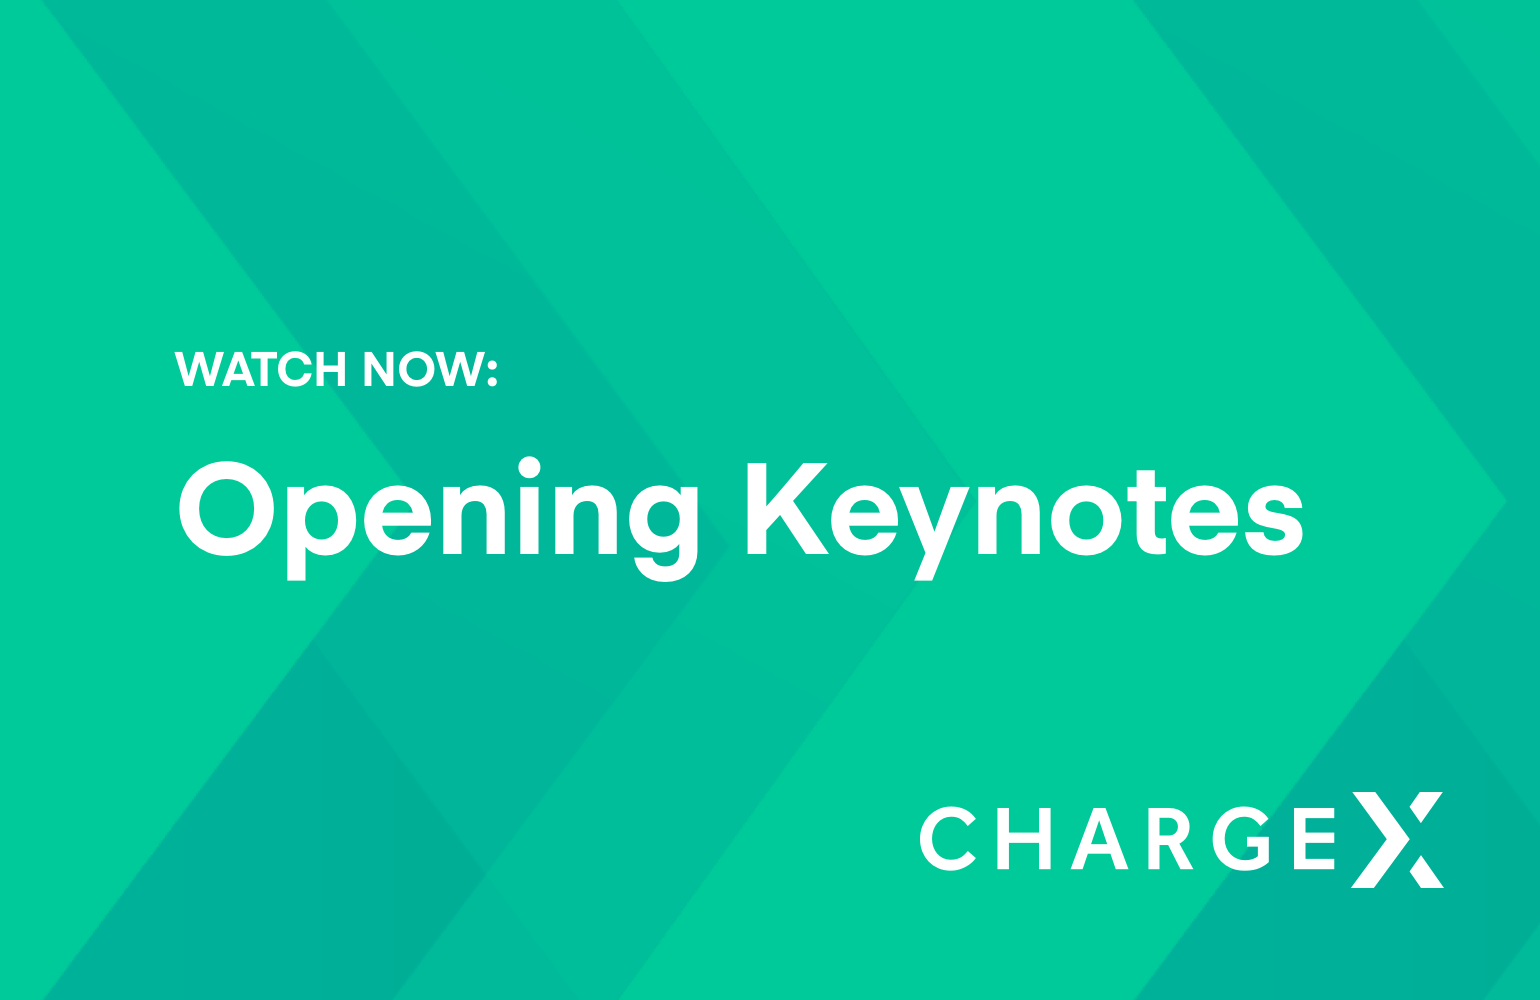 ChargeX: ChargeX: Opening keynotes